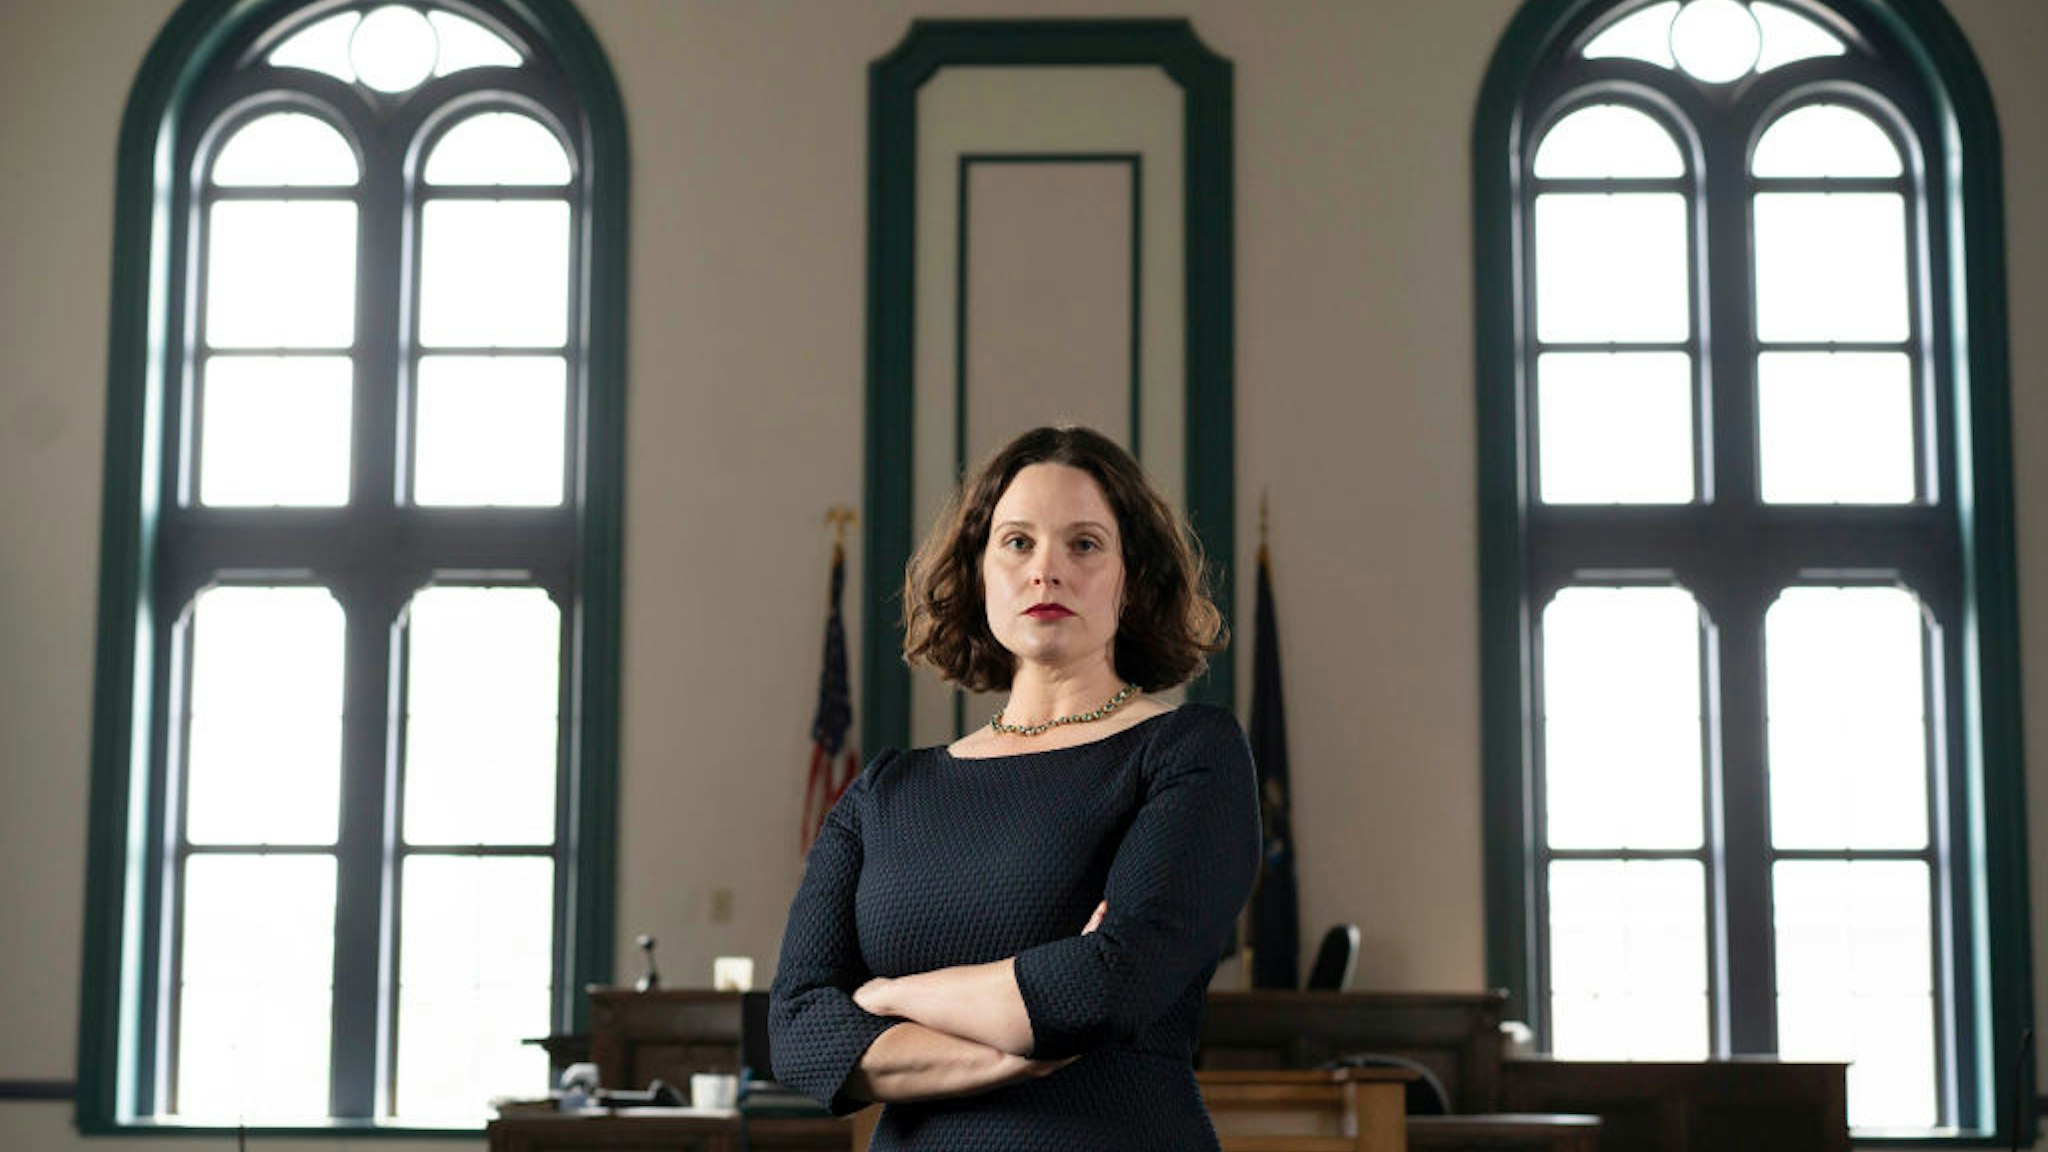 Natasha Irving, District Attorney for Sagadahoc County, poses for a photo in a courtroom at the Sagadahoc County Courthouse in Bath on Thursday, June 6, 2019.